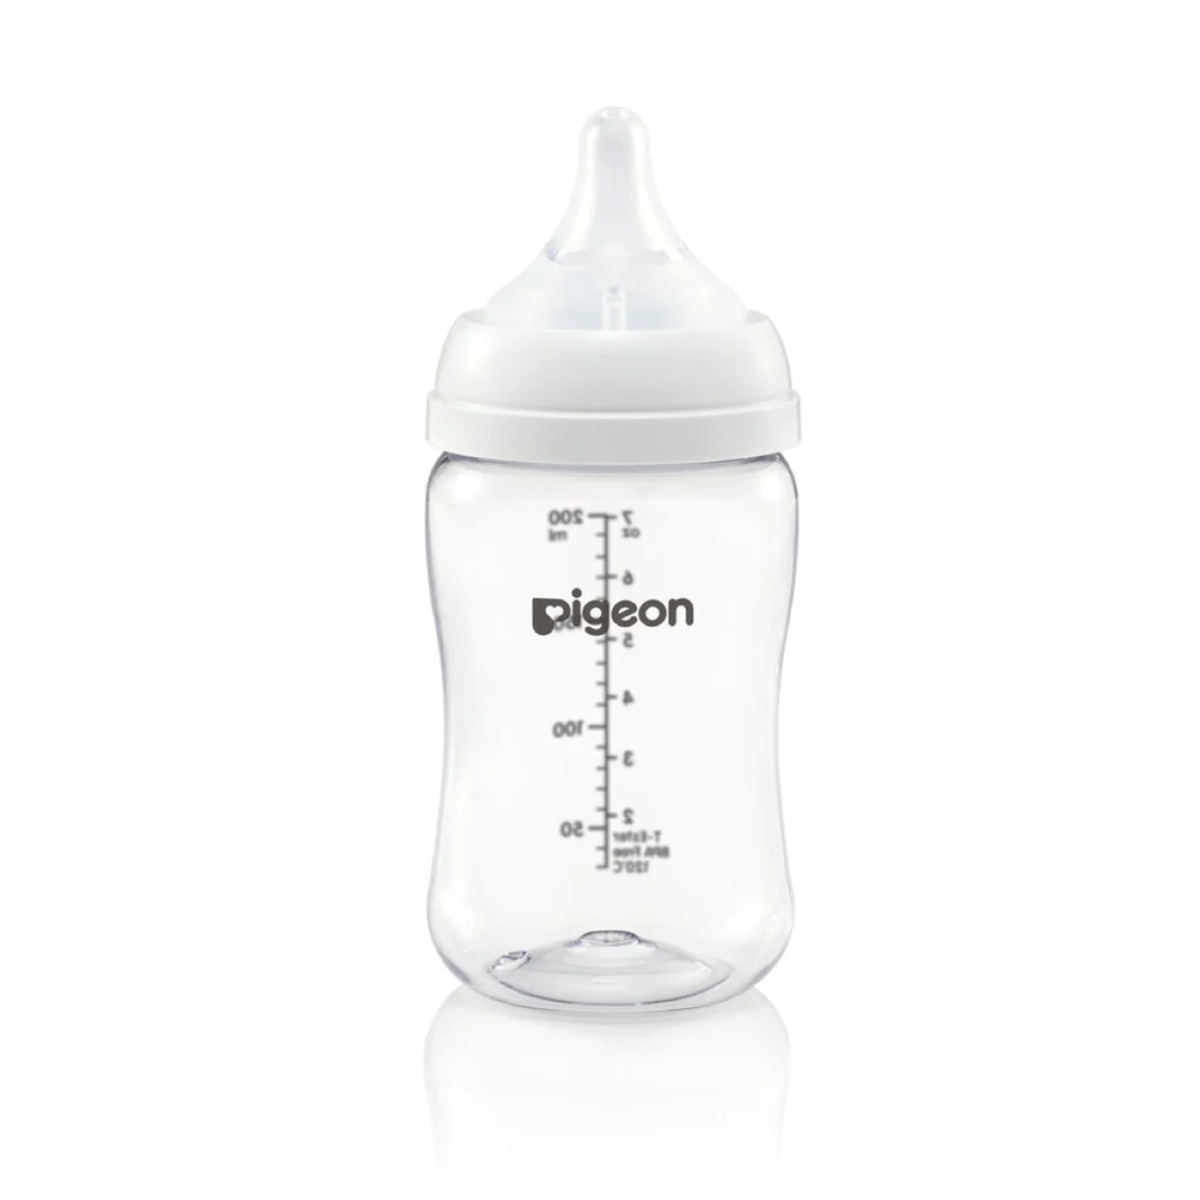 Pigeon Silicone Coating (Glass Inside/Silicone Outside) Nursing Bottle,  Wide Neck, Streamlined Body, Natural Feel, Easy to Clean, Heat-Resistant